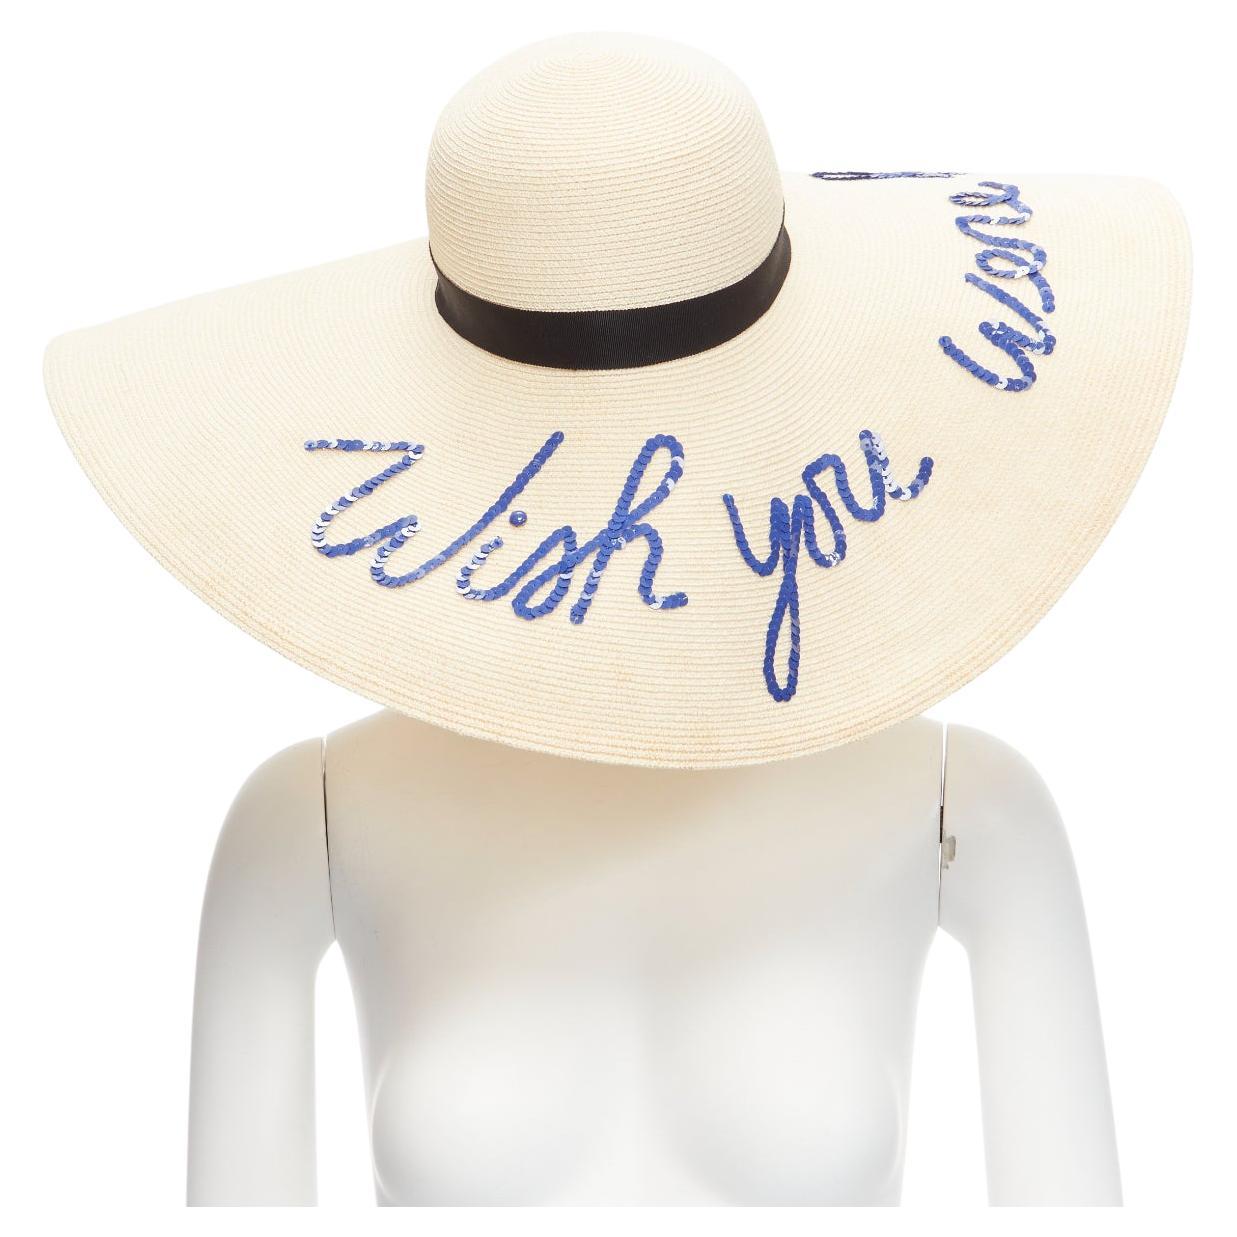 EUGENIA KIM blue sequins Wish You Were Here beige toyo paper cotton sun hat For Sale